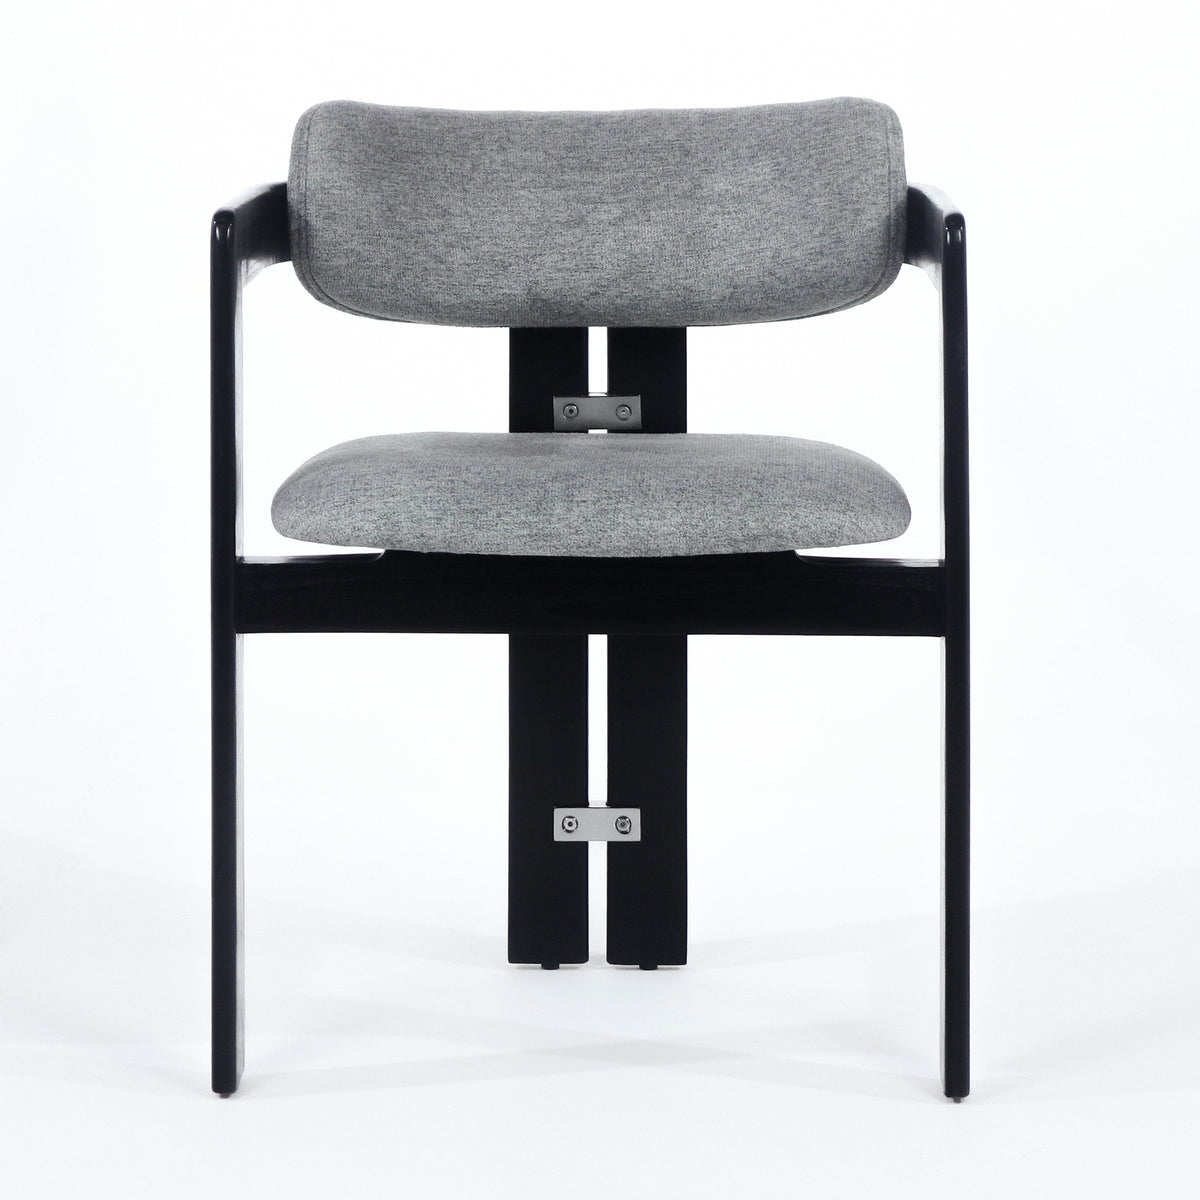 Pamplona Black, Stainless &amp; Grey Boucle Dining Chair - INTERIORTONIC